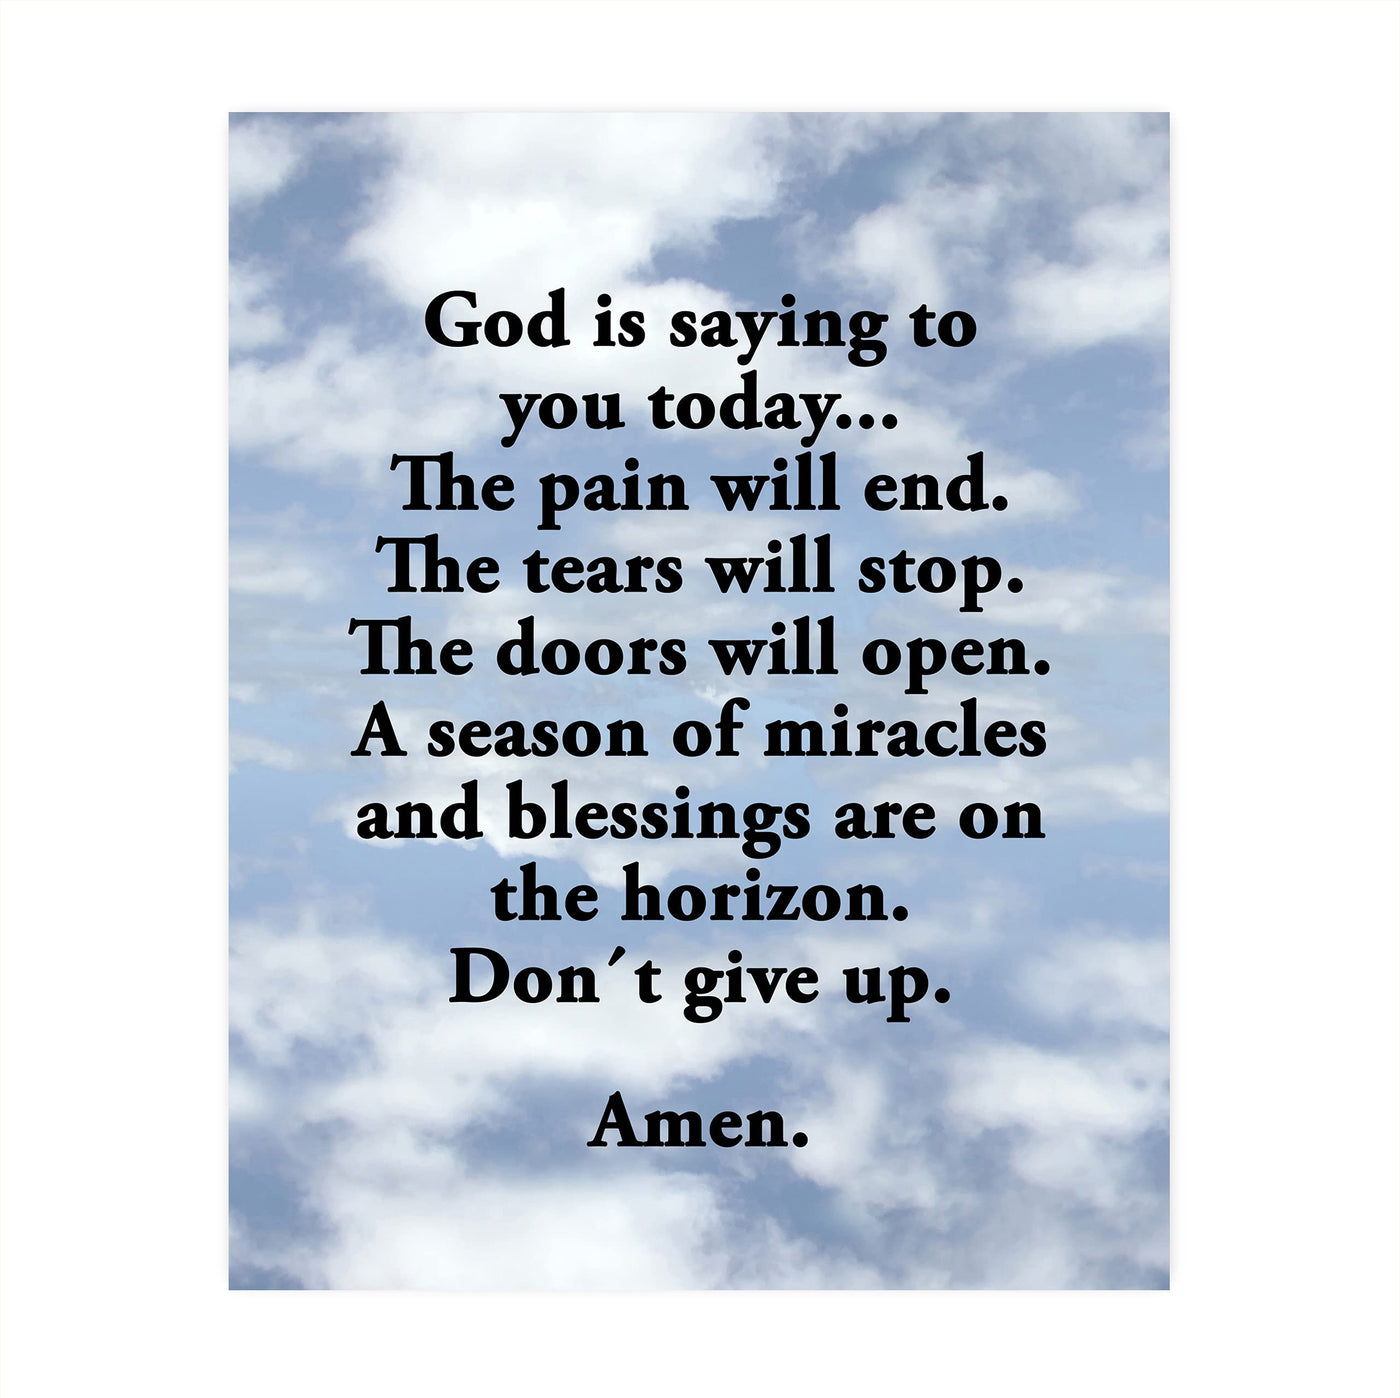 God Is Saying to You-Don't Give Up Inspirational Quotes Wall Decor-8 x 10" Christian Art Print-Ready to Frame. Motivational Home-Office-Religious-Church Decor. Great Gift of Faith & Inspiration!